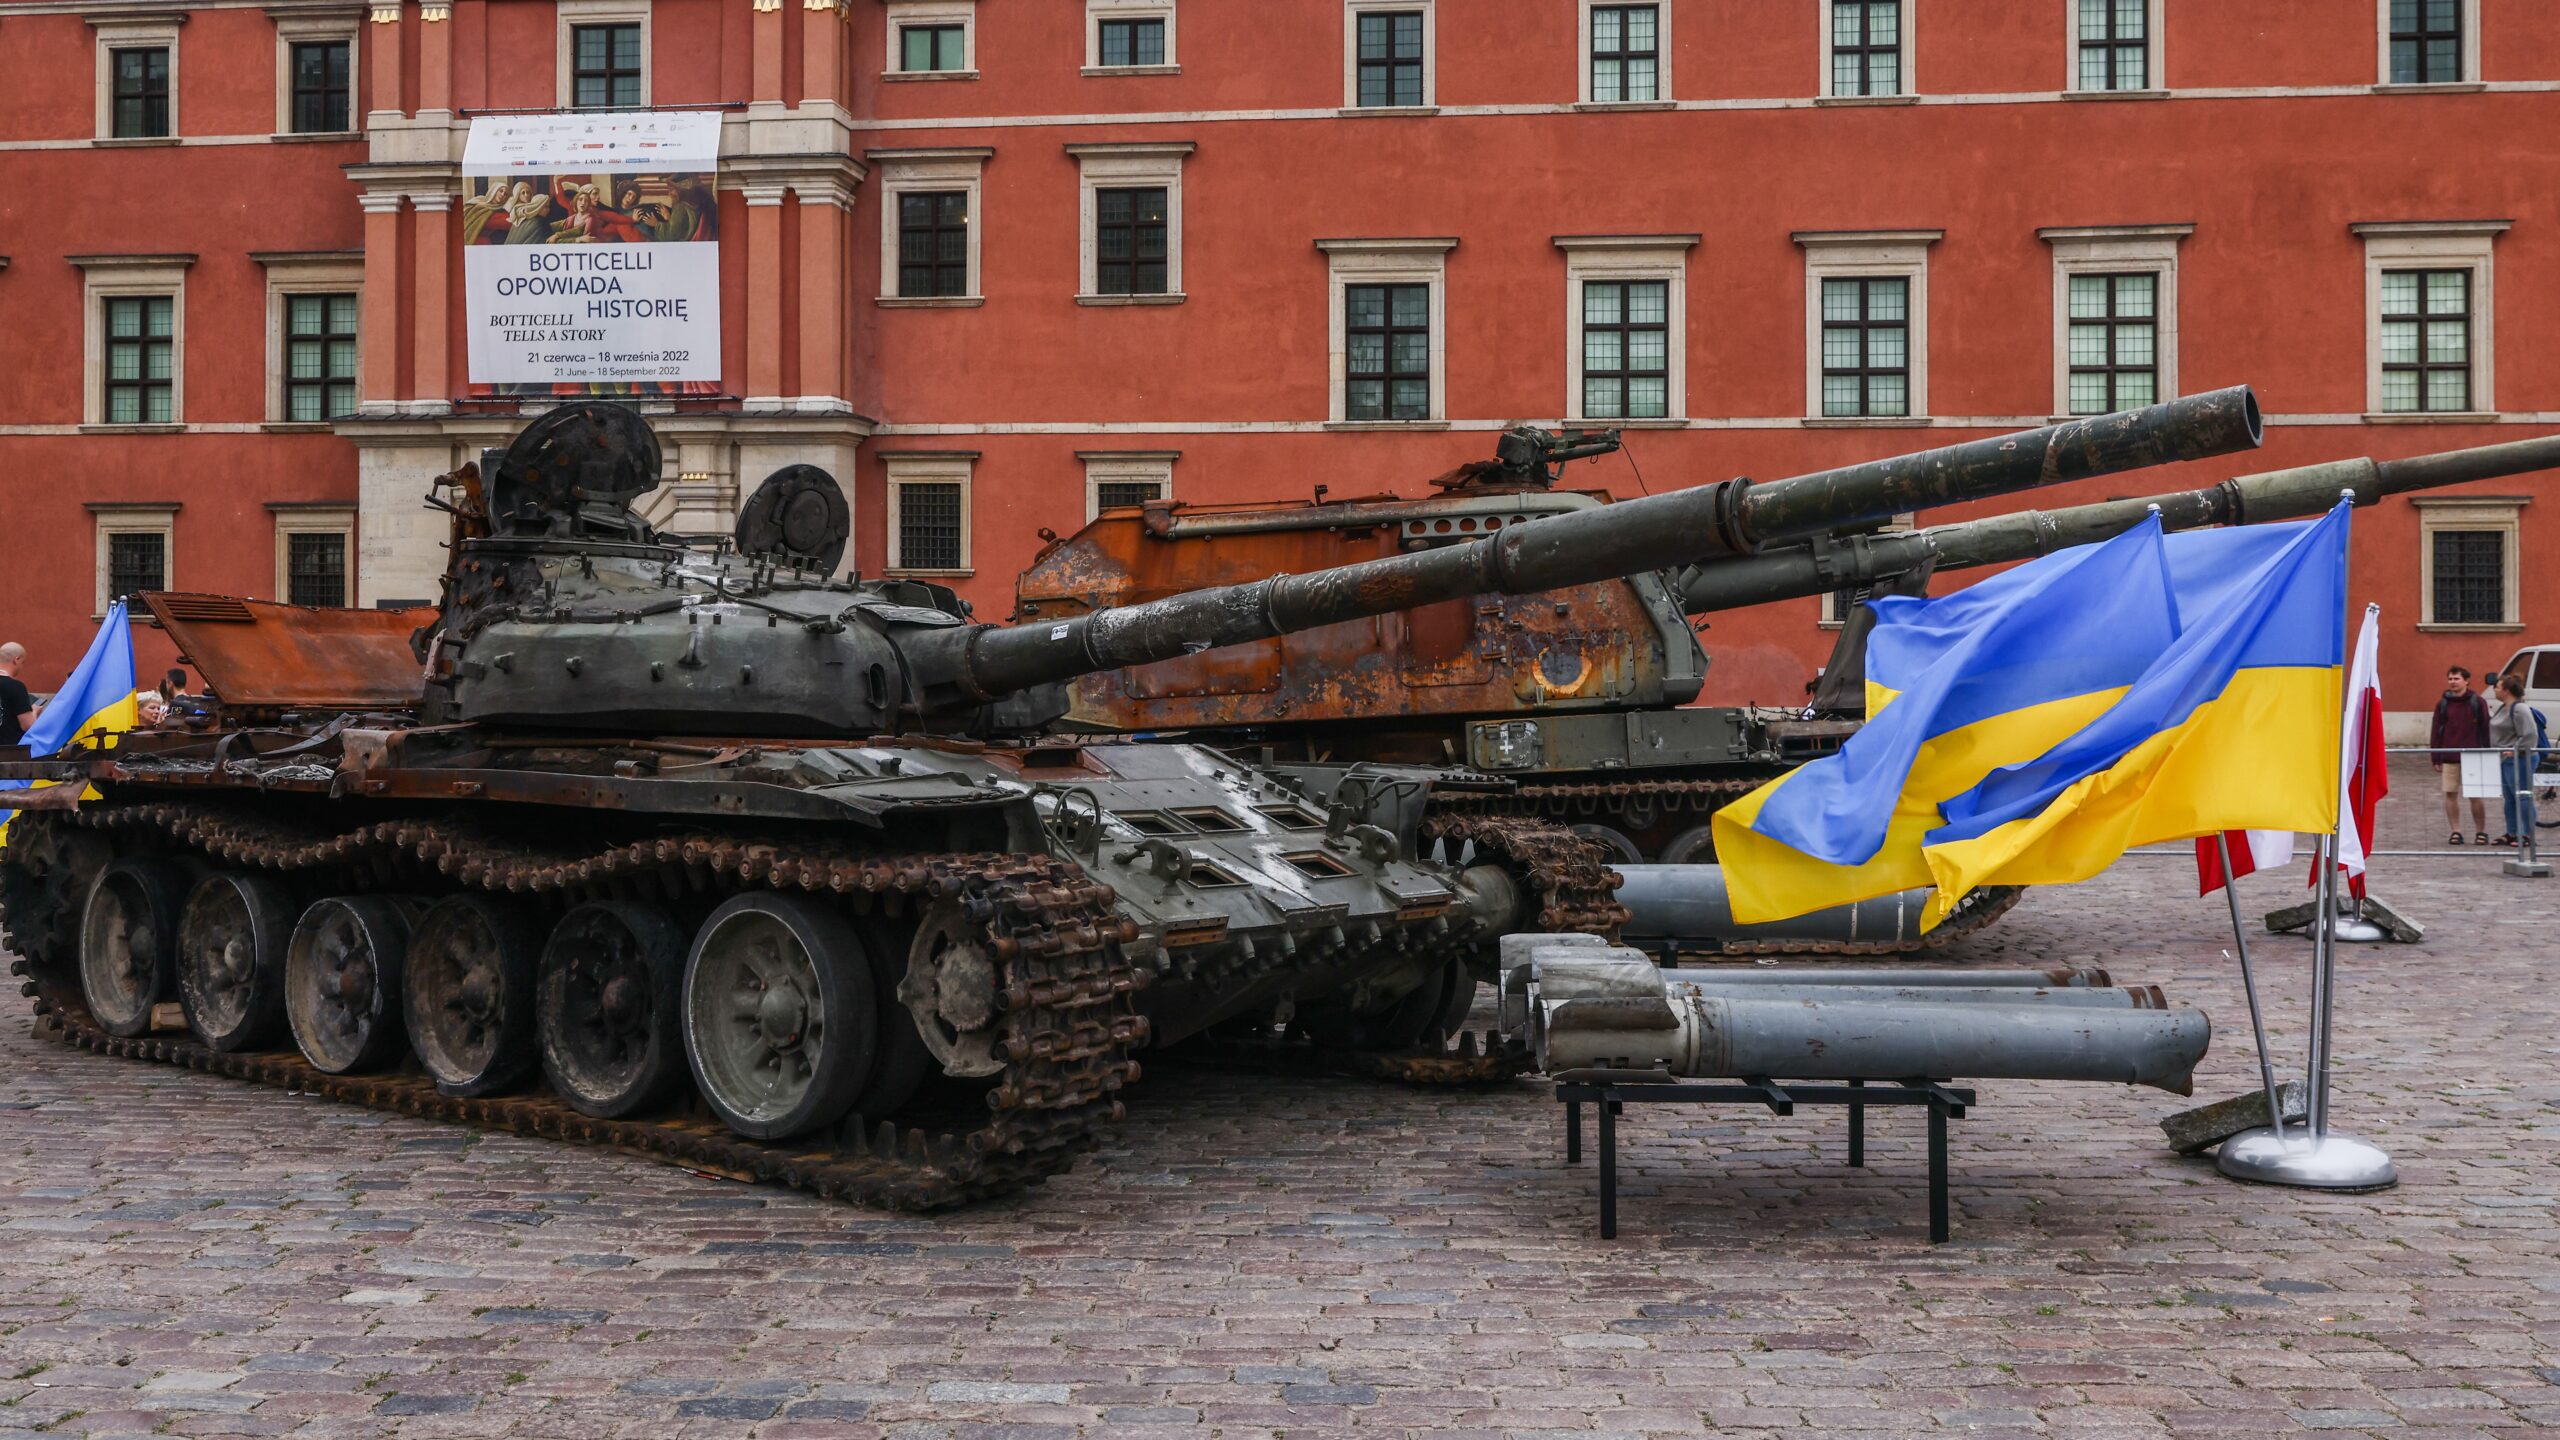 Refurbished Soviet tanks, HAWK missiles and more Phoenix Ghost drones coming soon to Ukraine